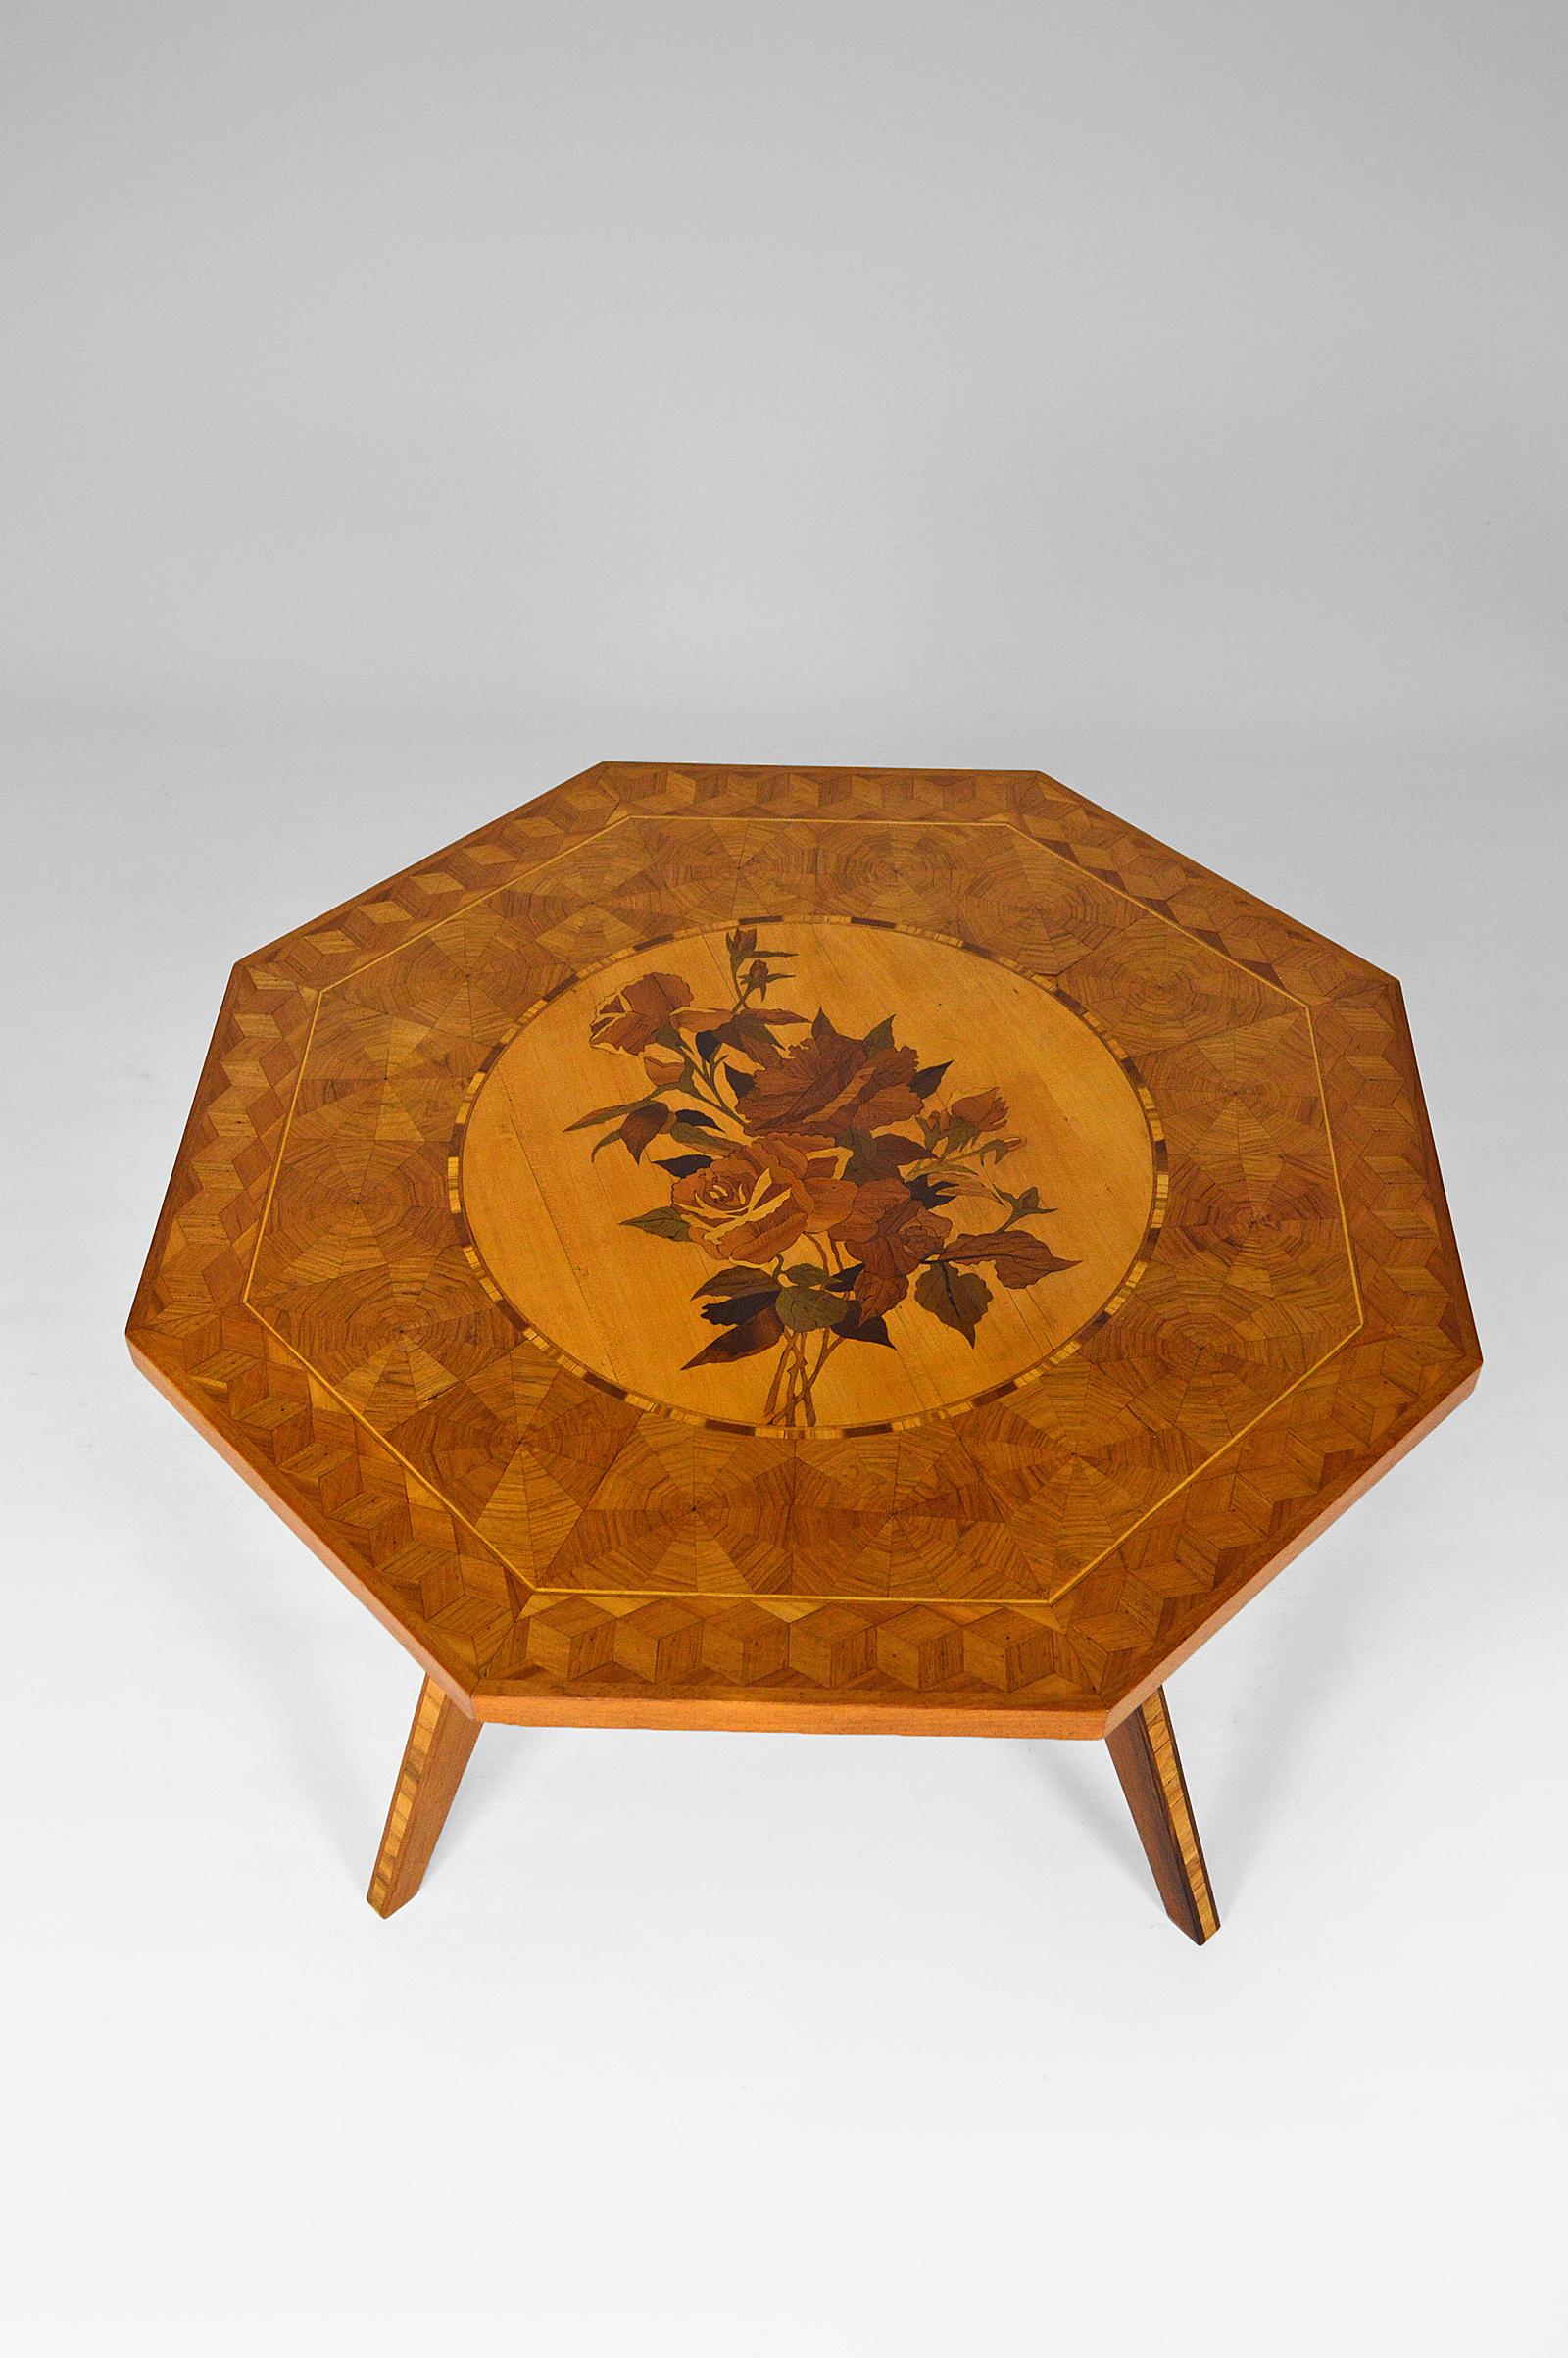 Mid-20th Century Mid-Century Modern Italian Floral Inlaid Round Coffee / Side Table / Gueridon For Sale